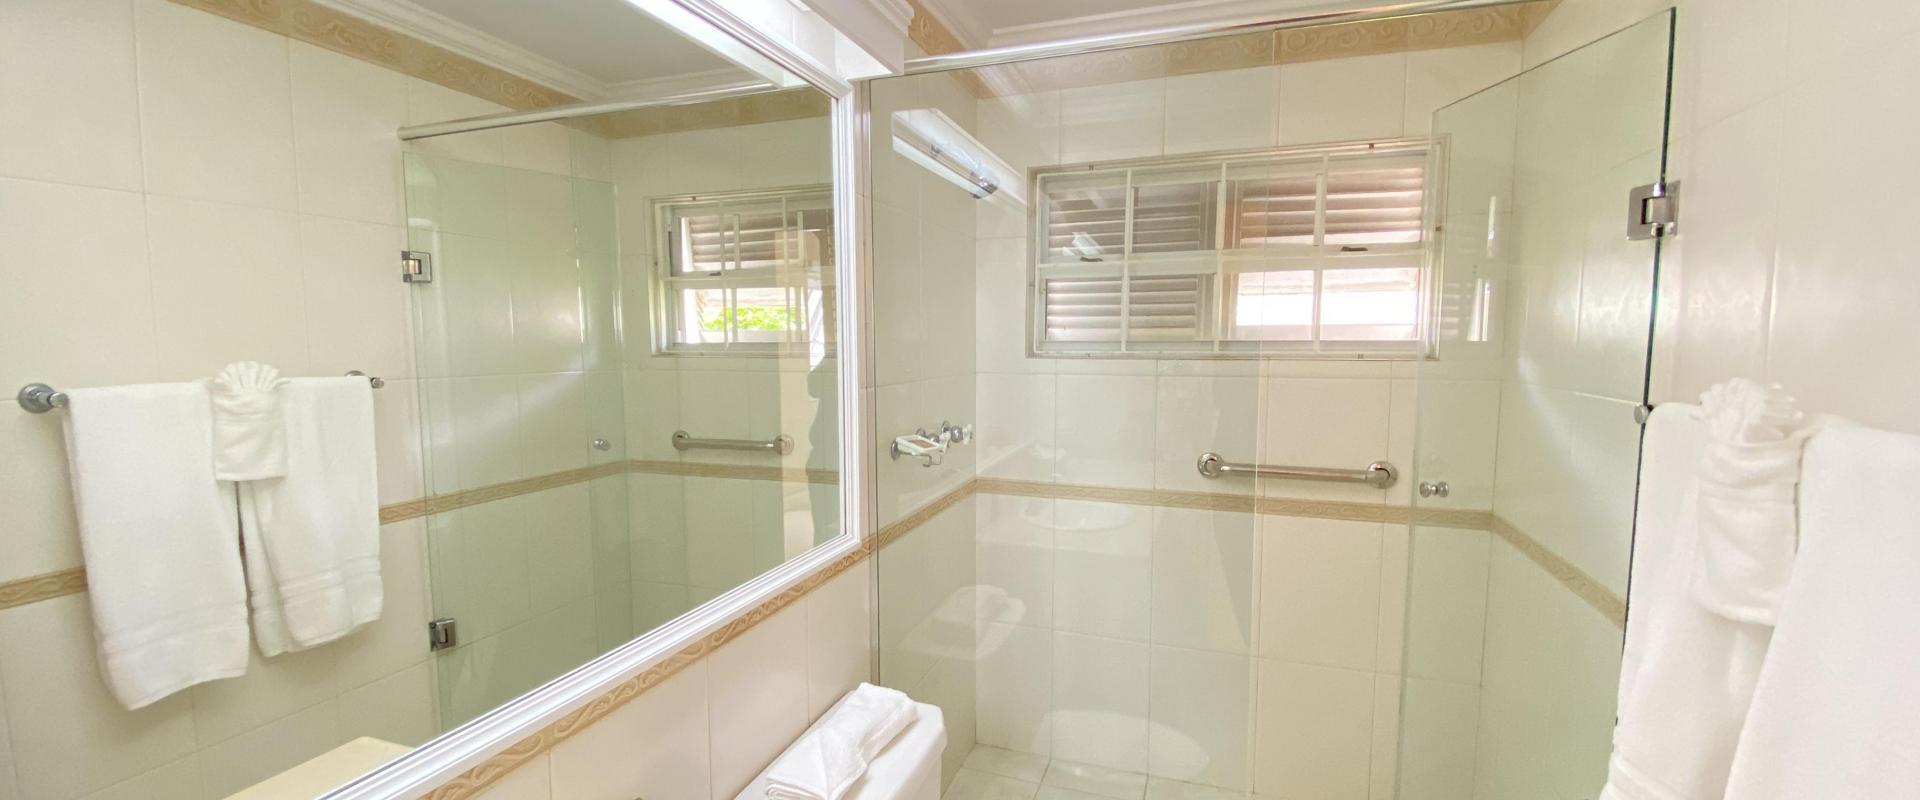 Fosters House Holiday Rental In Barbados Bathroom 2